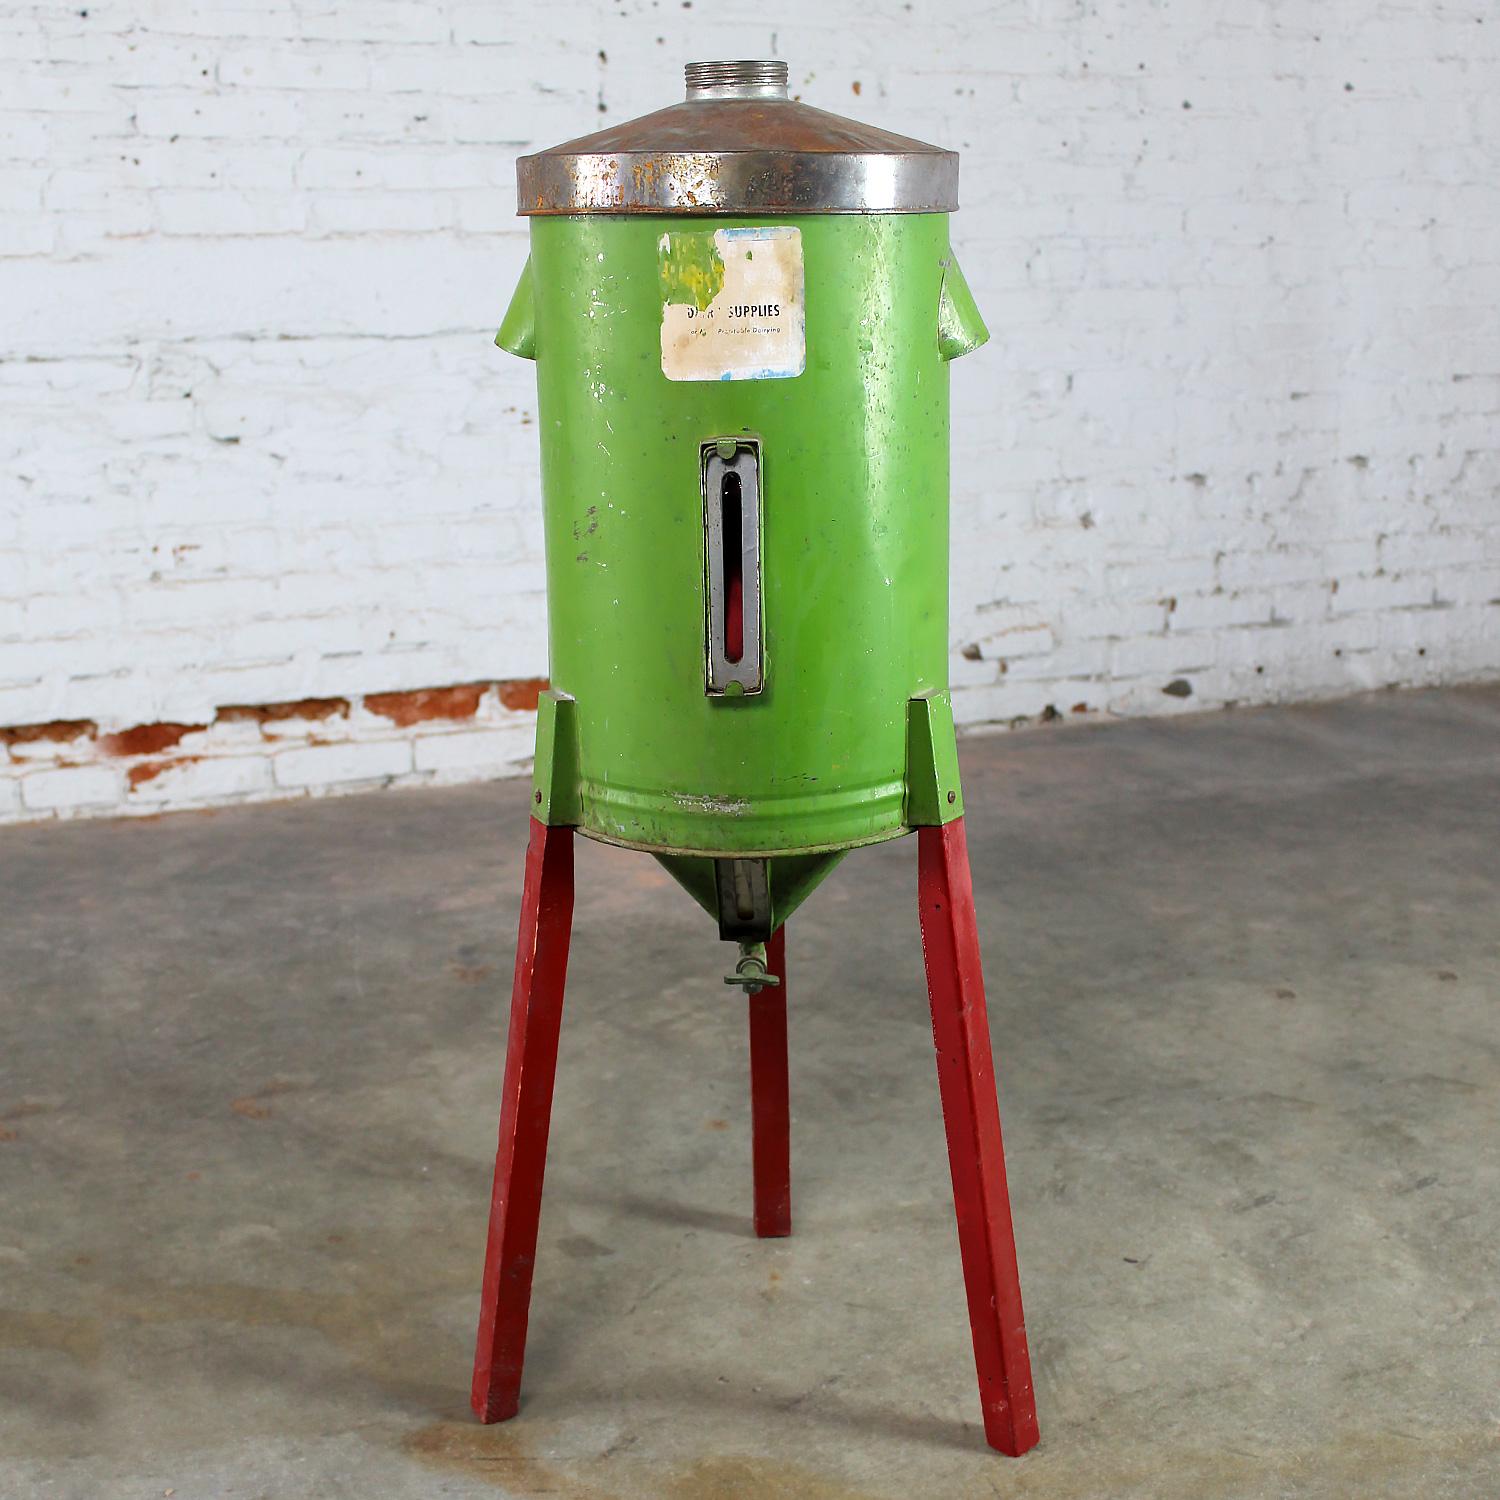 Early - Mid-20th Century Rustic Gravity Cream Separator Green Metal Can Red Legs For Sale 8